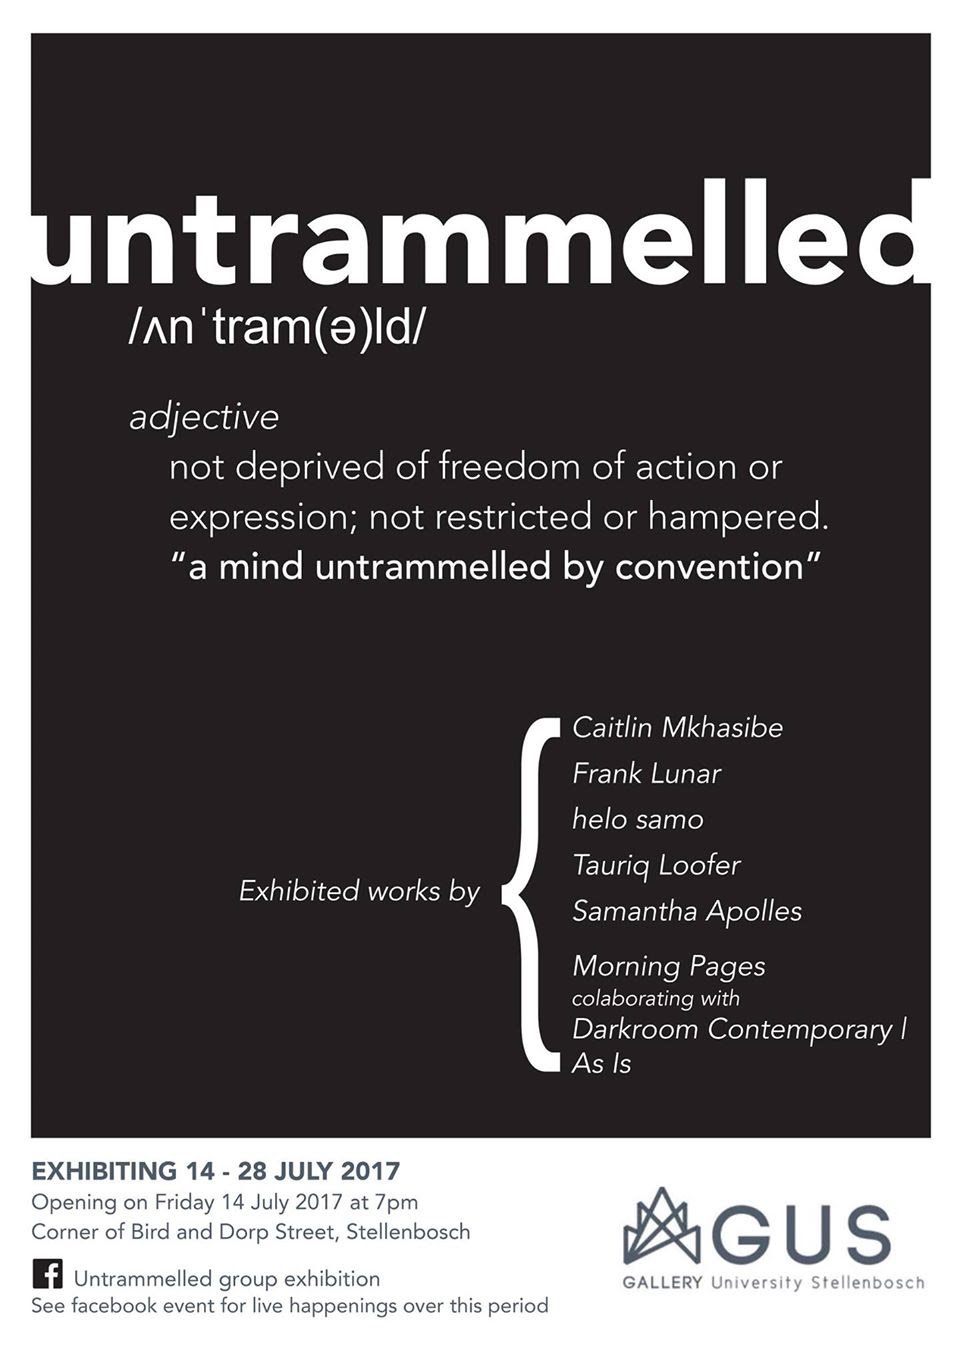 Untrammelled group exhibition at Gallery of the University of Stellenbosch